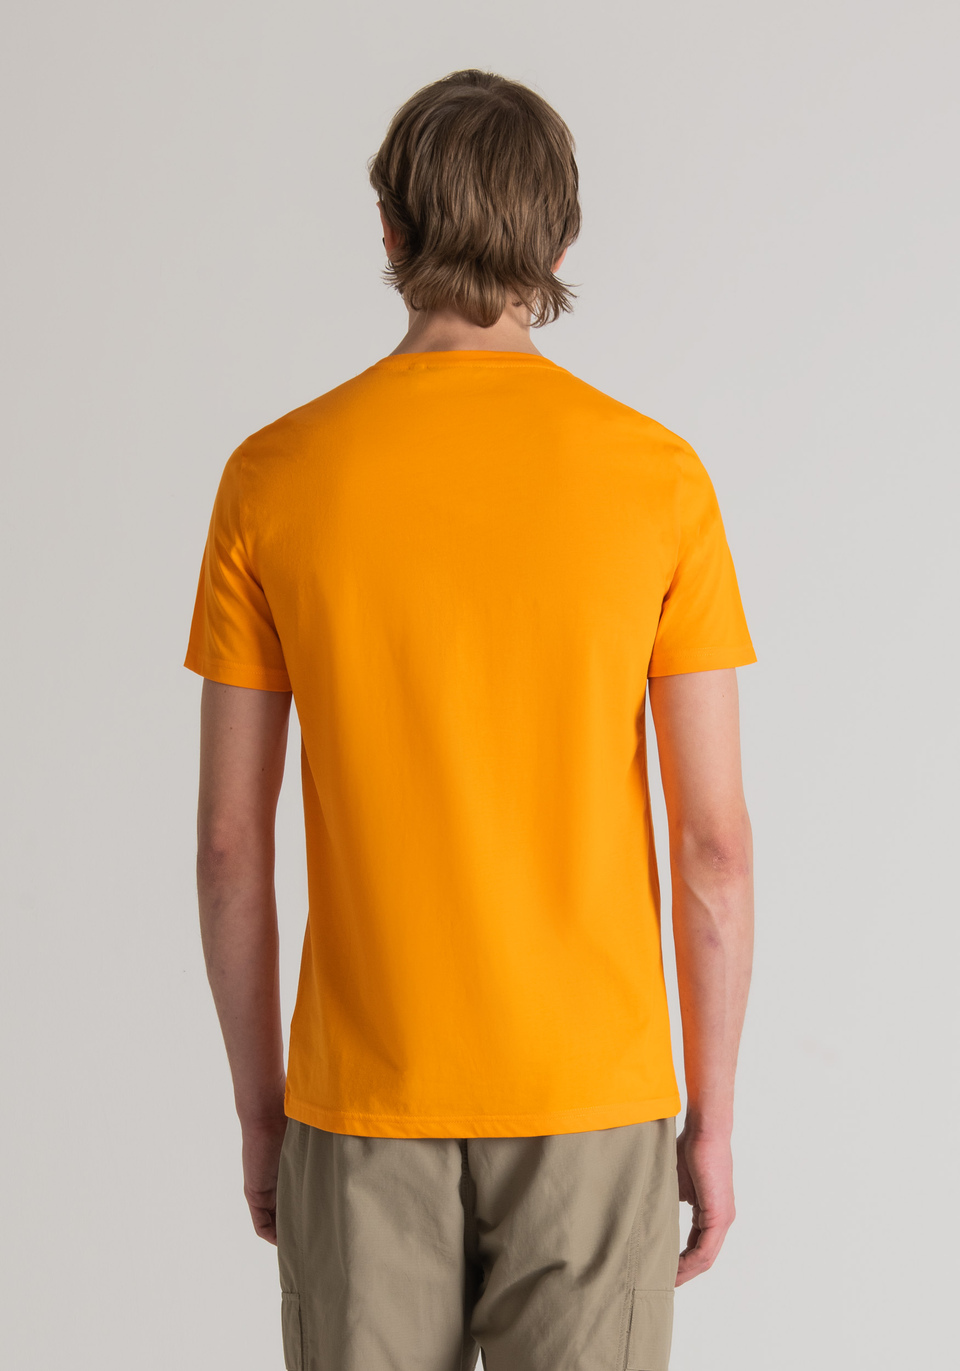 SLIM-FIT T-SHIRT IN SOFT COTTON WITH LOGO AND FLORAL PRINT - Antony Morato Online Shop